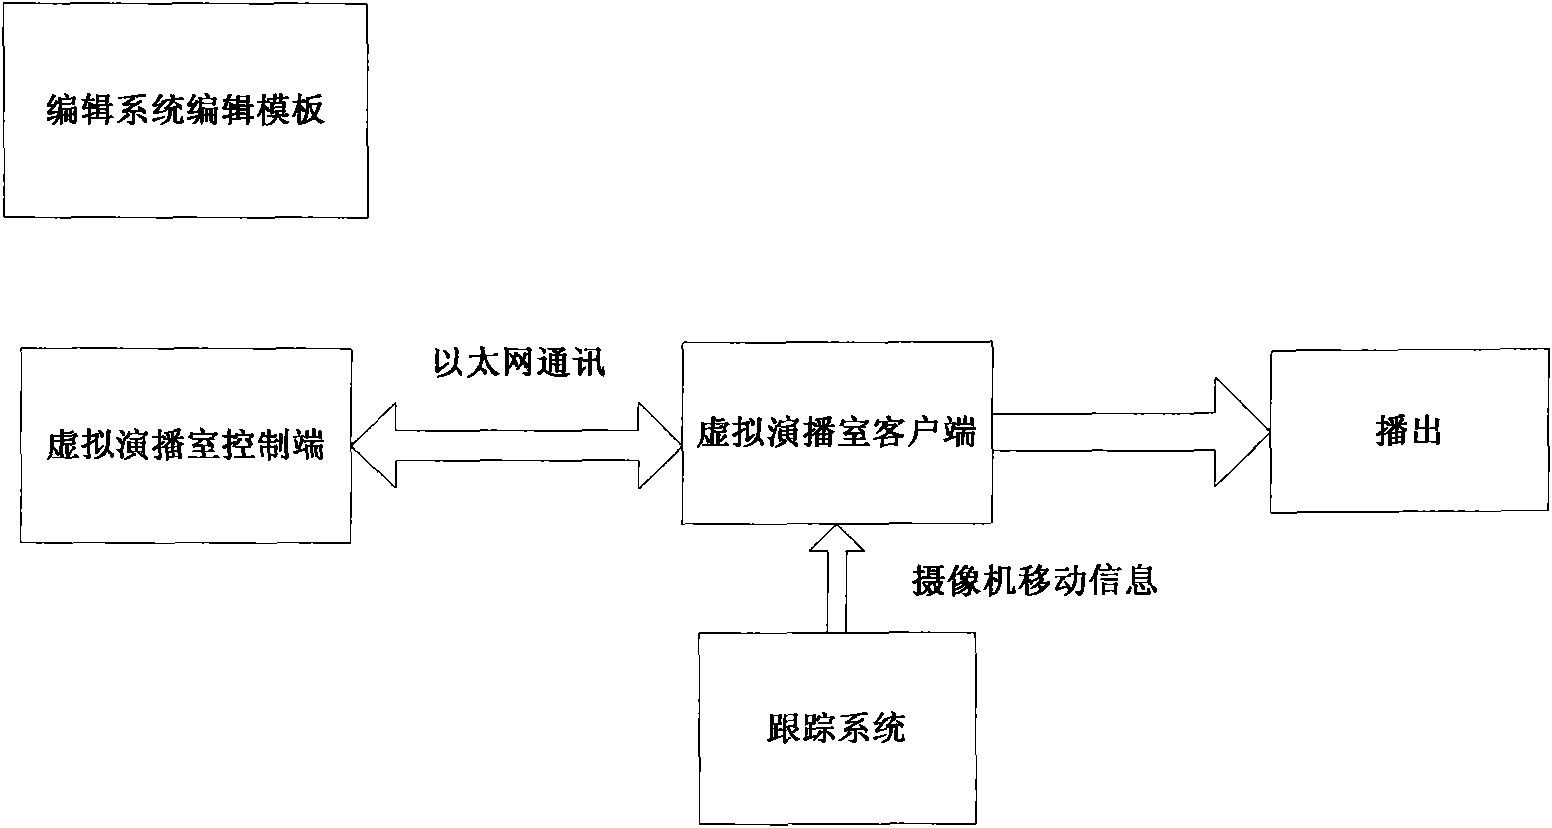 Method for editing template in real time in virtual studio system